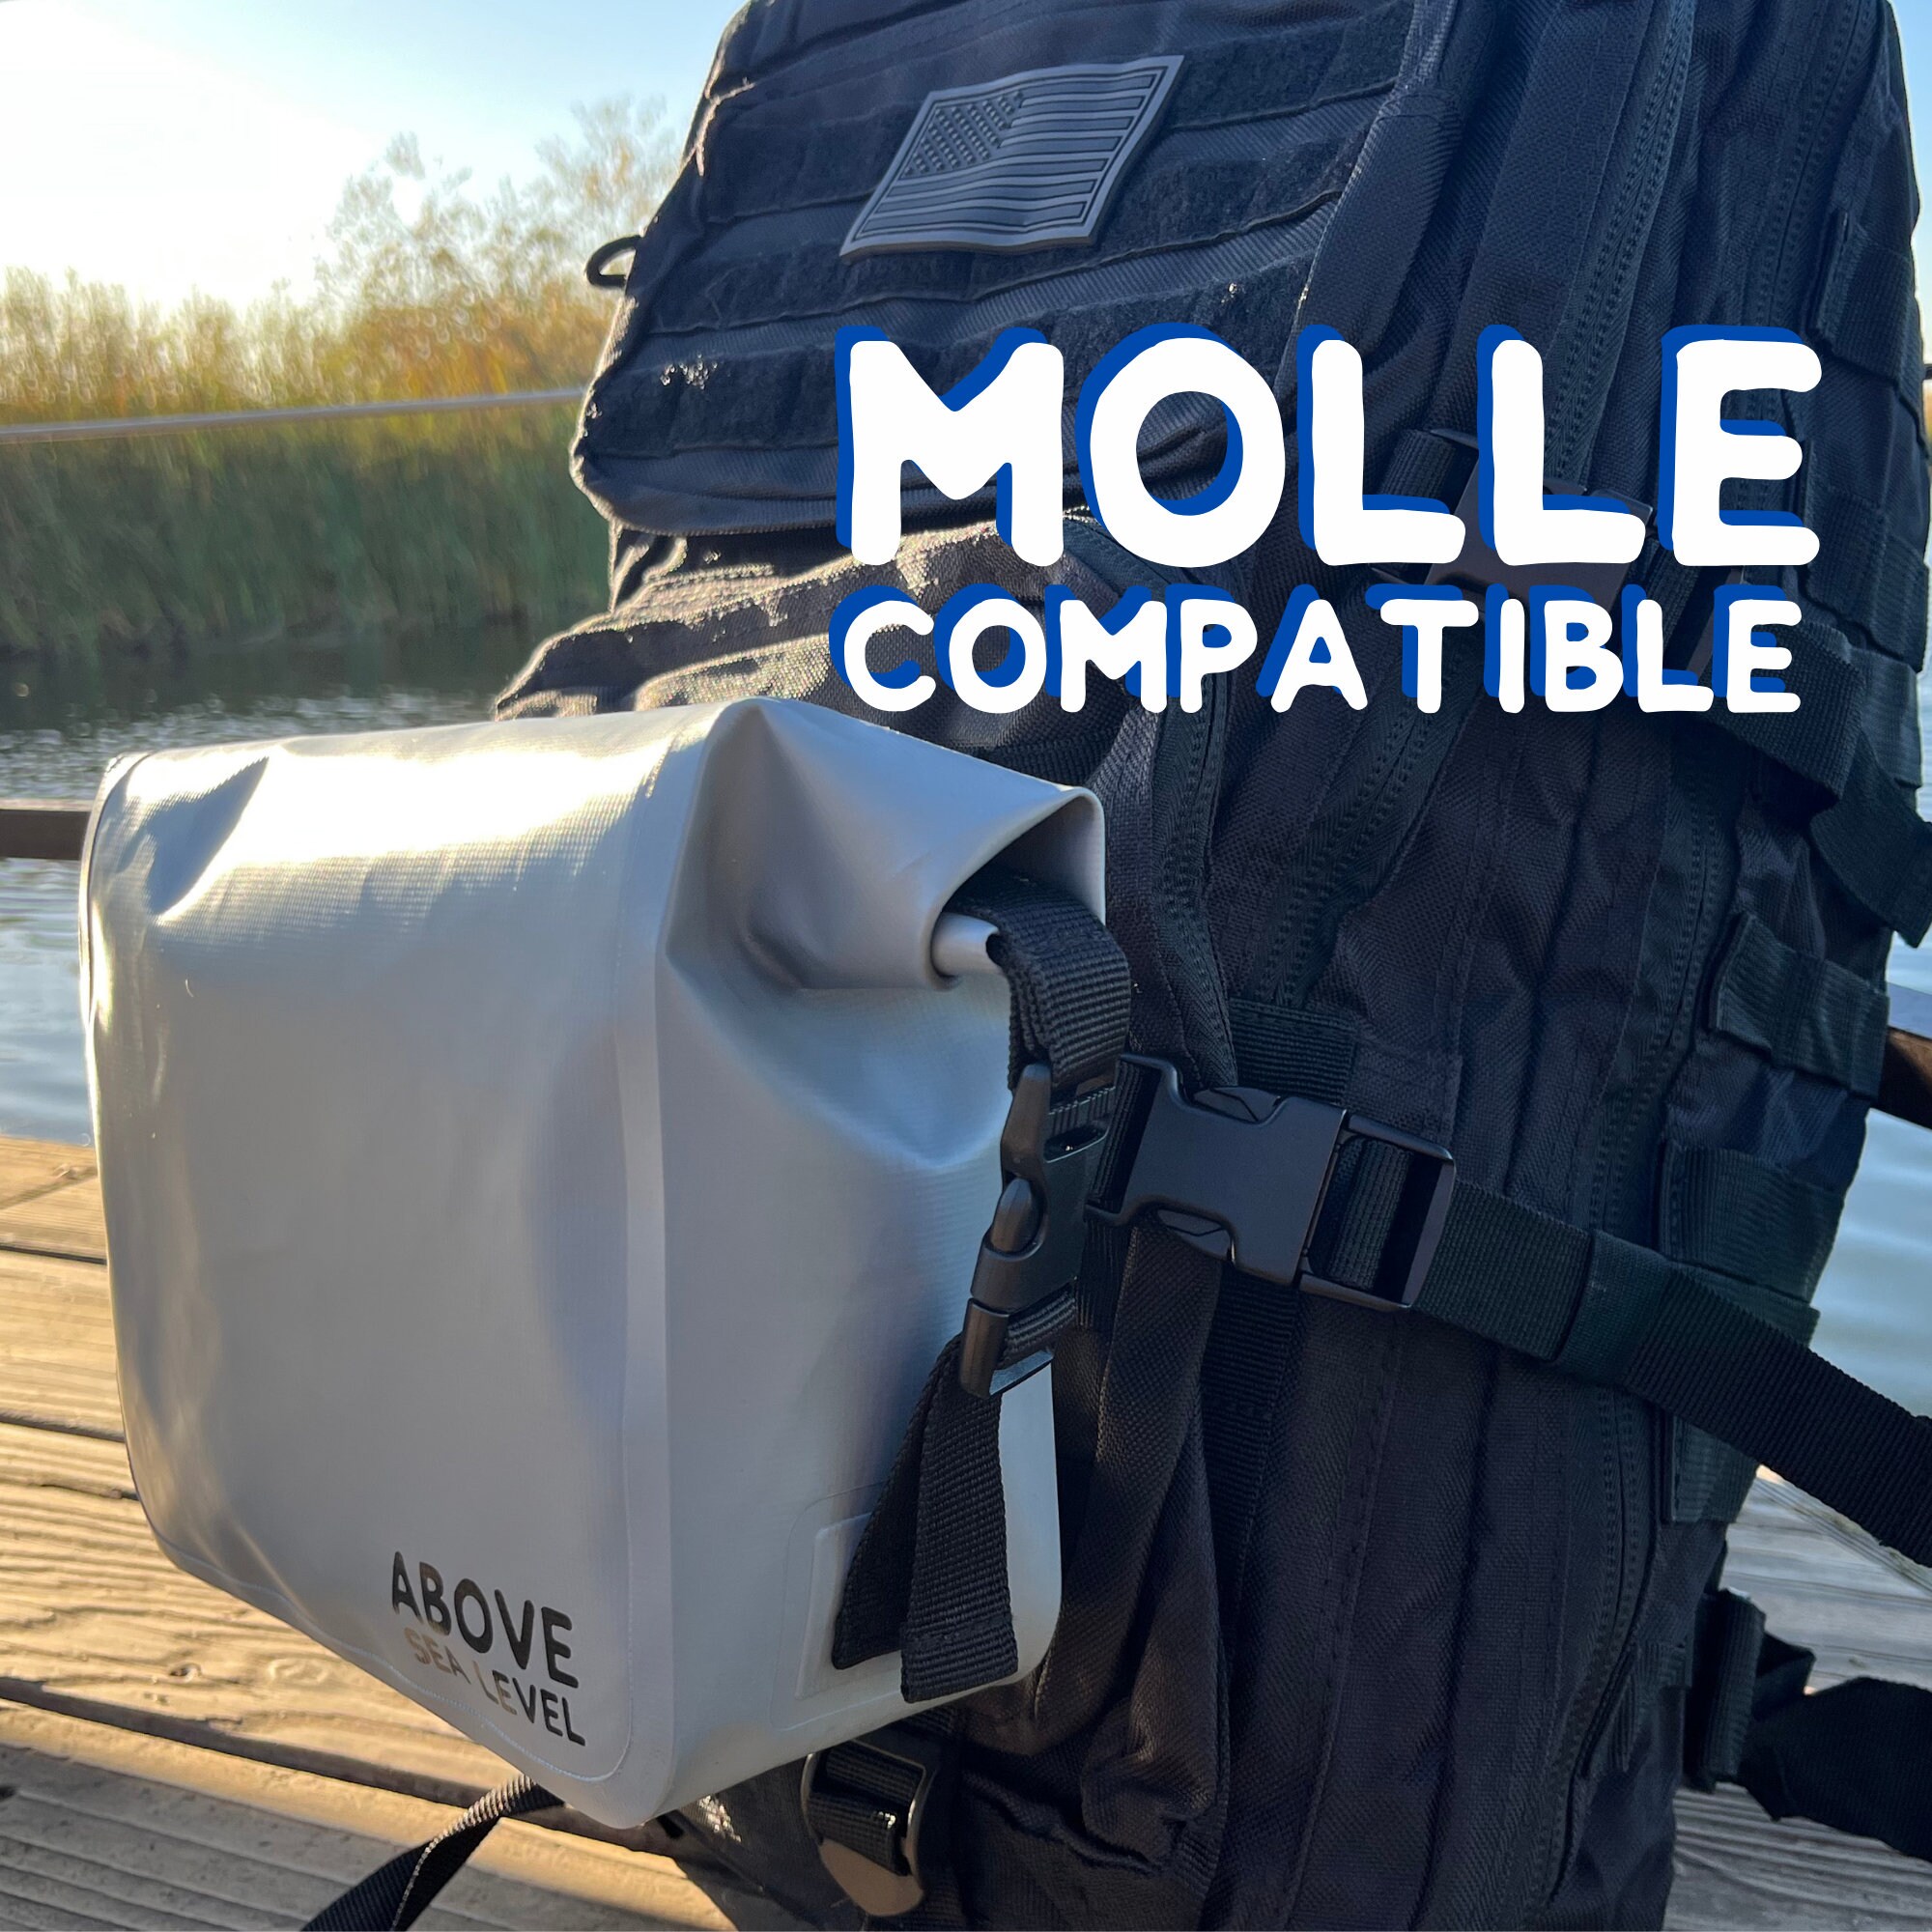  GJL Molle Dry Bag, Small Waterproof Pouch Organizer Dry Bag Fit  For Yeti Soft Coolers, Yeti Backpacks, And Totes, Compatible With Yeti  Hopper Yeti Accessories, Easy To Use (Black) : Sports